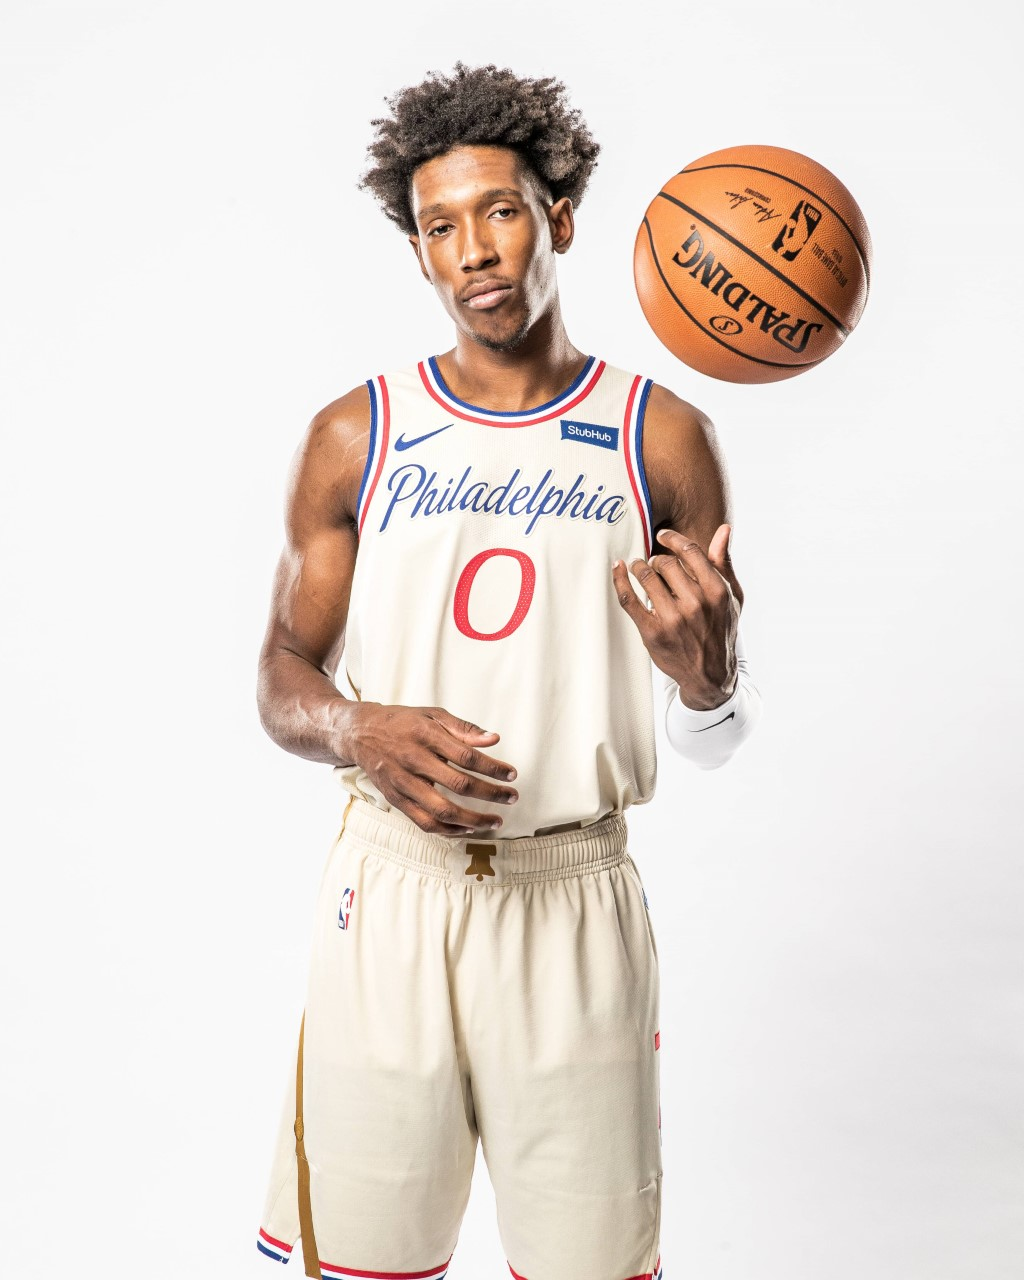 Sixers Roll Out the New “City Edition” Uniforms